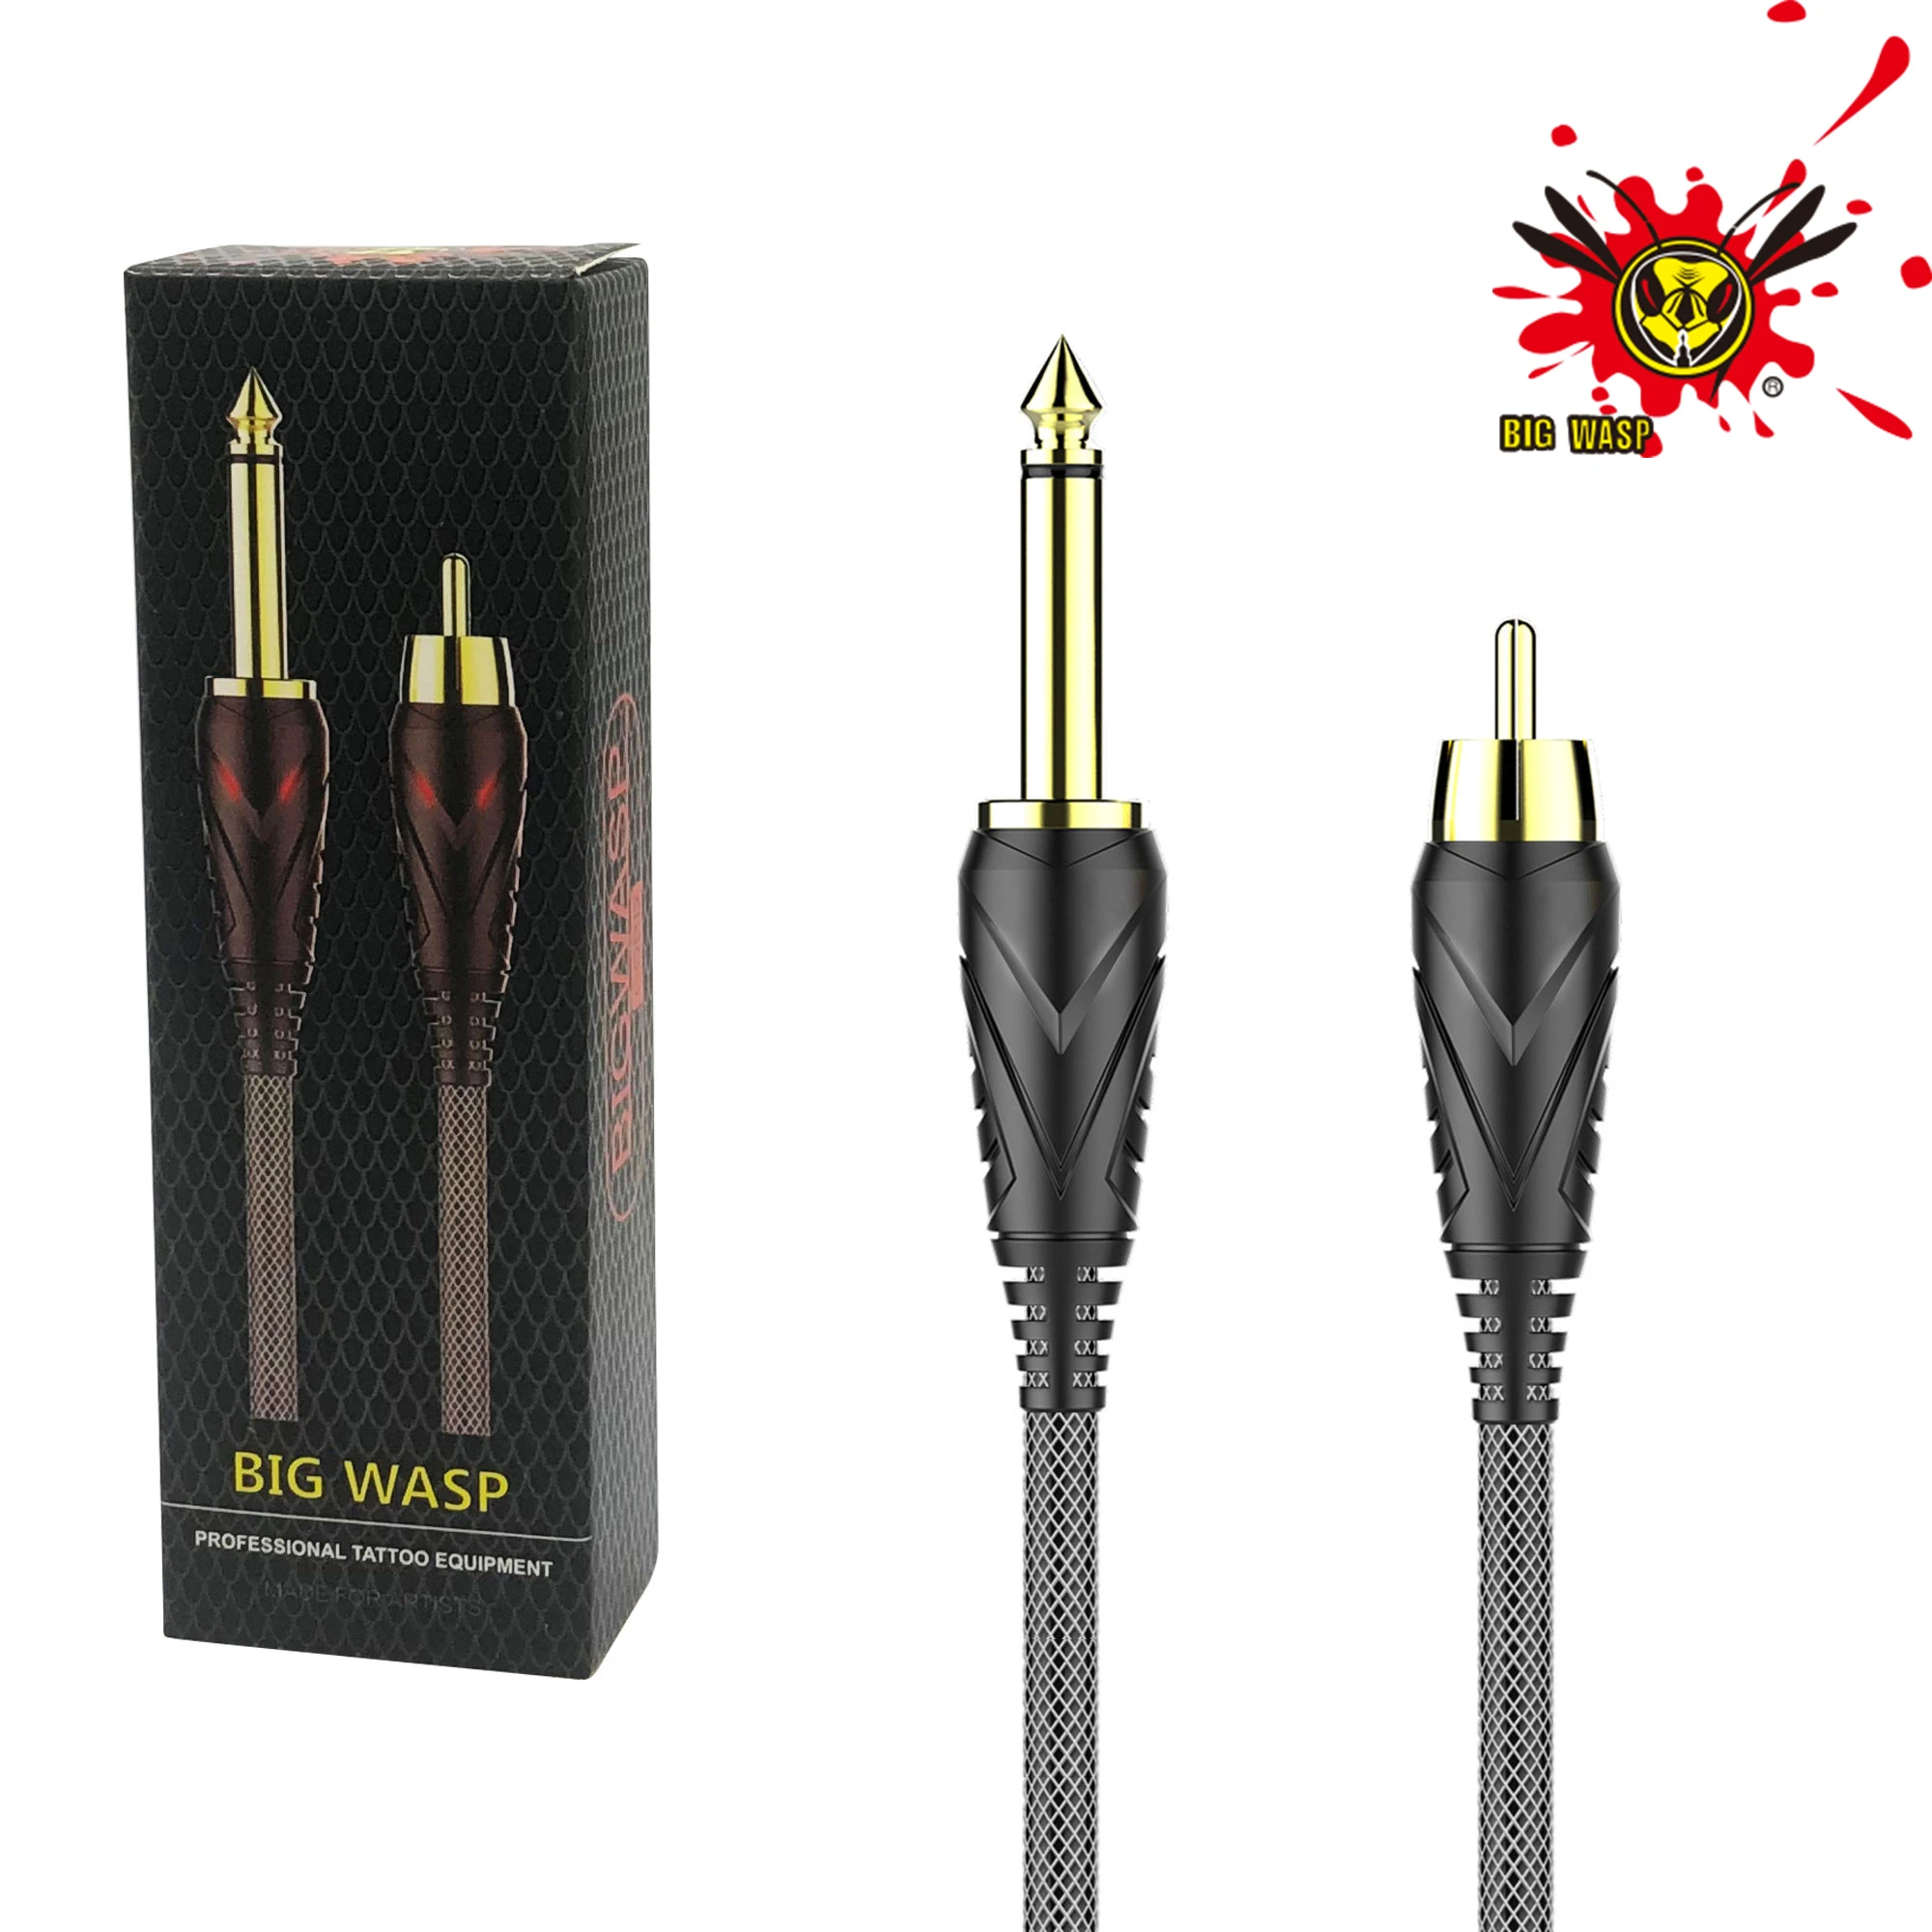 BIGWASP Tattoo RCA Connector Cords Integrated Plug-in More Durable Protects Cables Rotating Tattoo Cord With Stable Current 2m 1 set k type thermocouple miniature socket alloy mini panel mount plug connector yellow stock useful accs durable